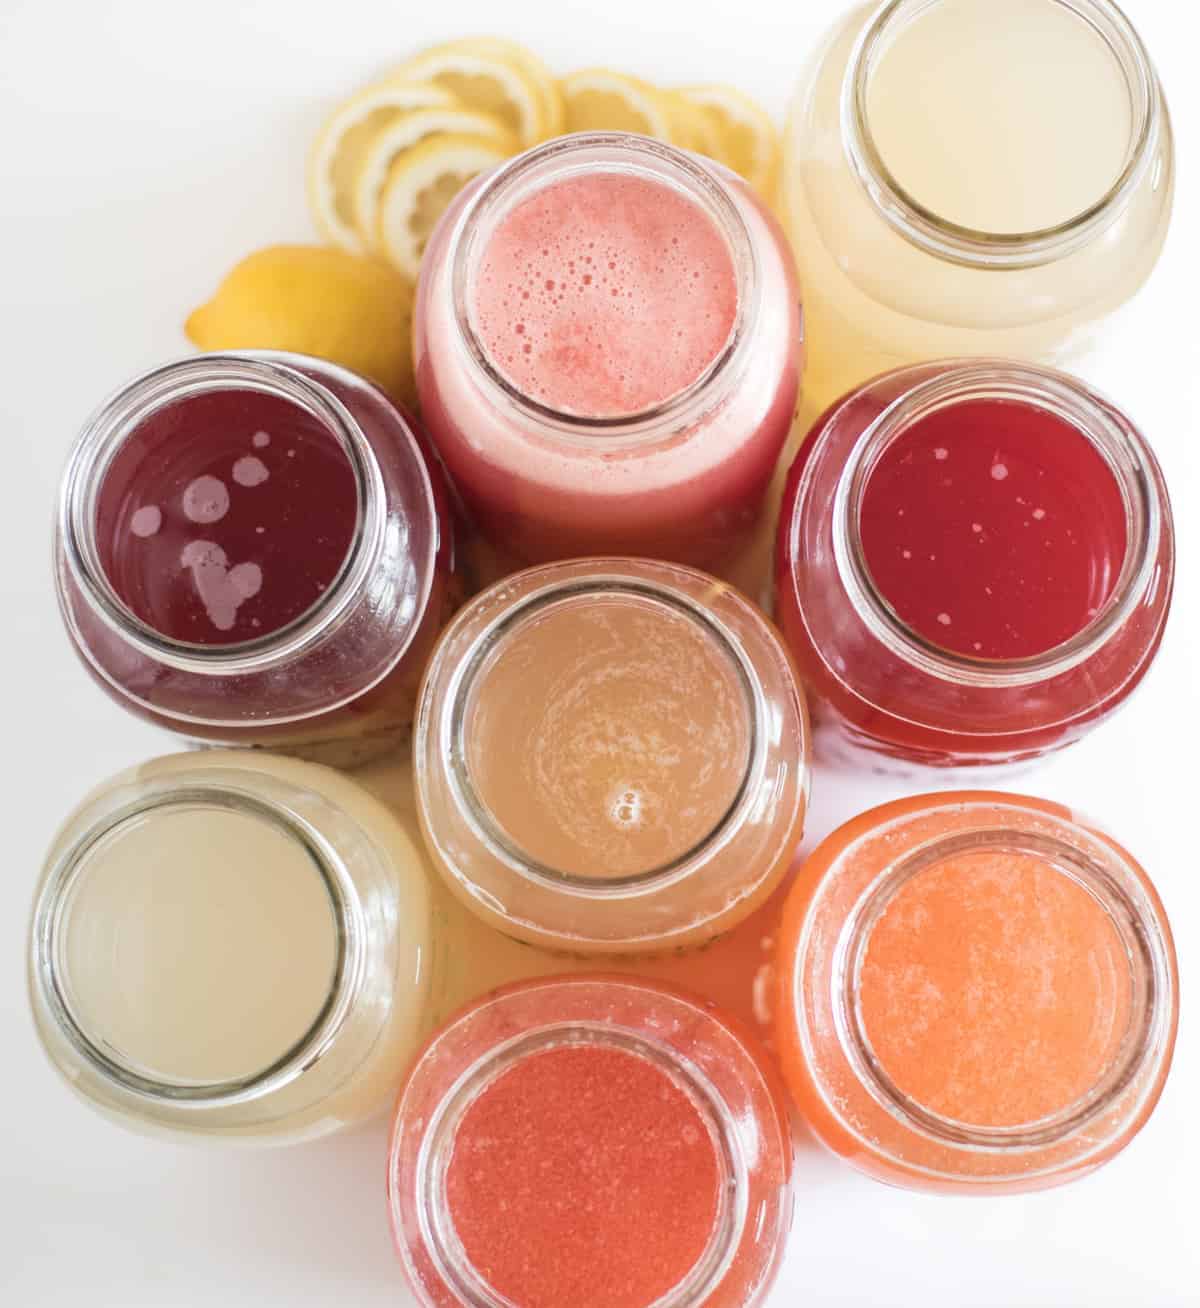 8 different homemade lemonade recipe all in one place! Learn how to make lemonade with fresh lemons or lemon juice in varieties like strawberry lemonade, raspberry lemonade, and even watermelon and tropical lemonade. This post will be your go-to guide for lemonade recipes.